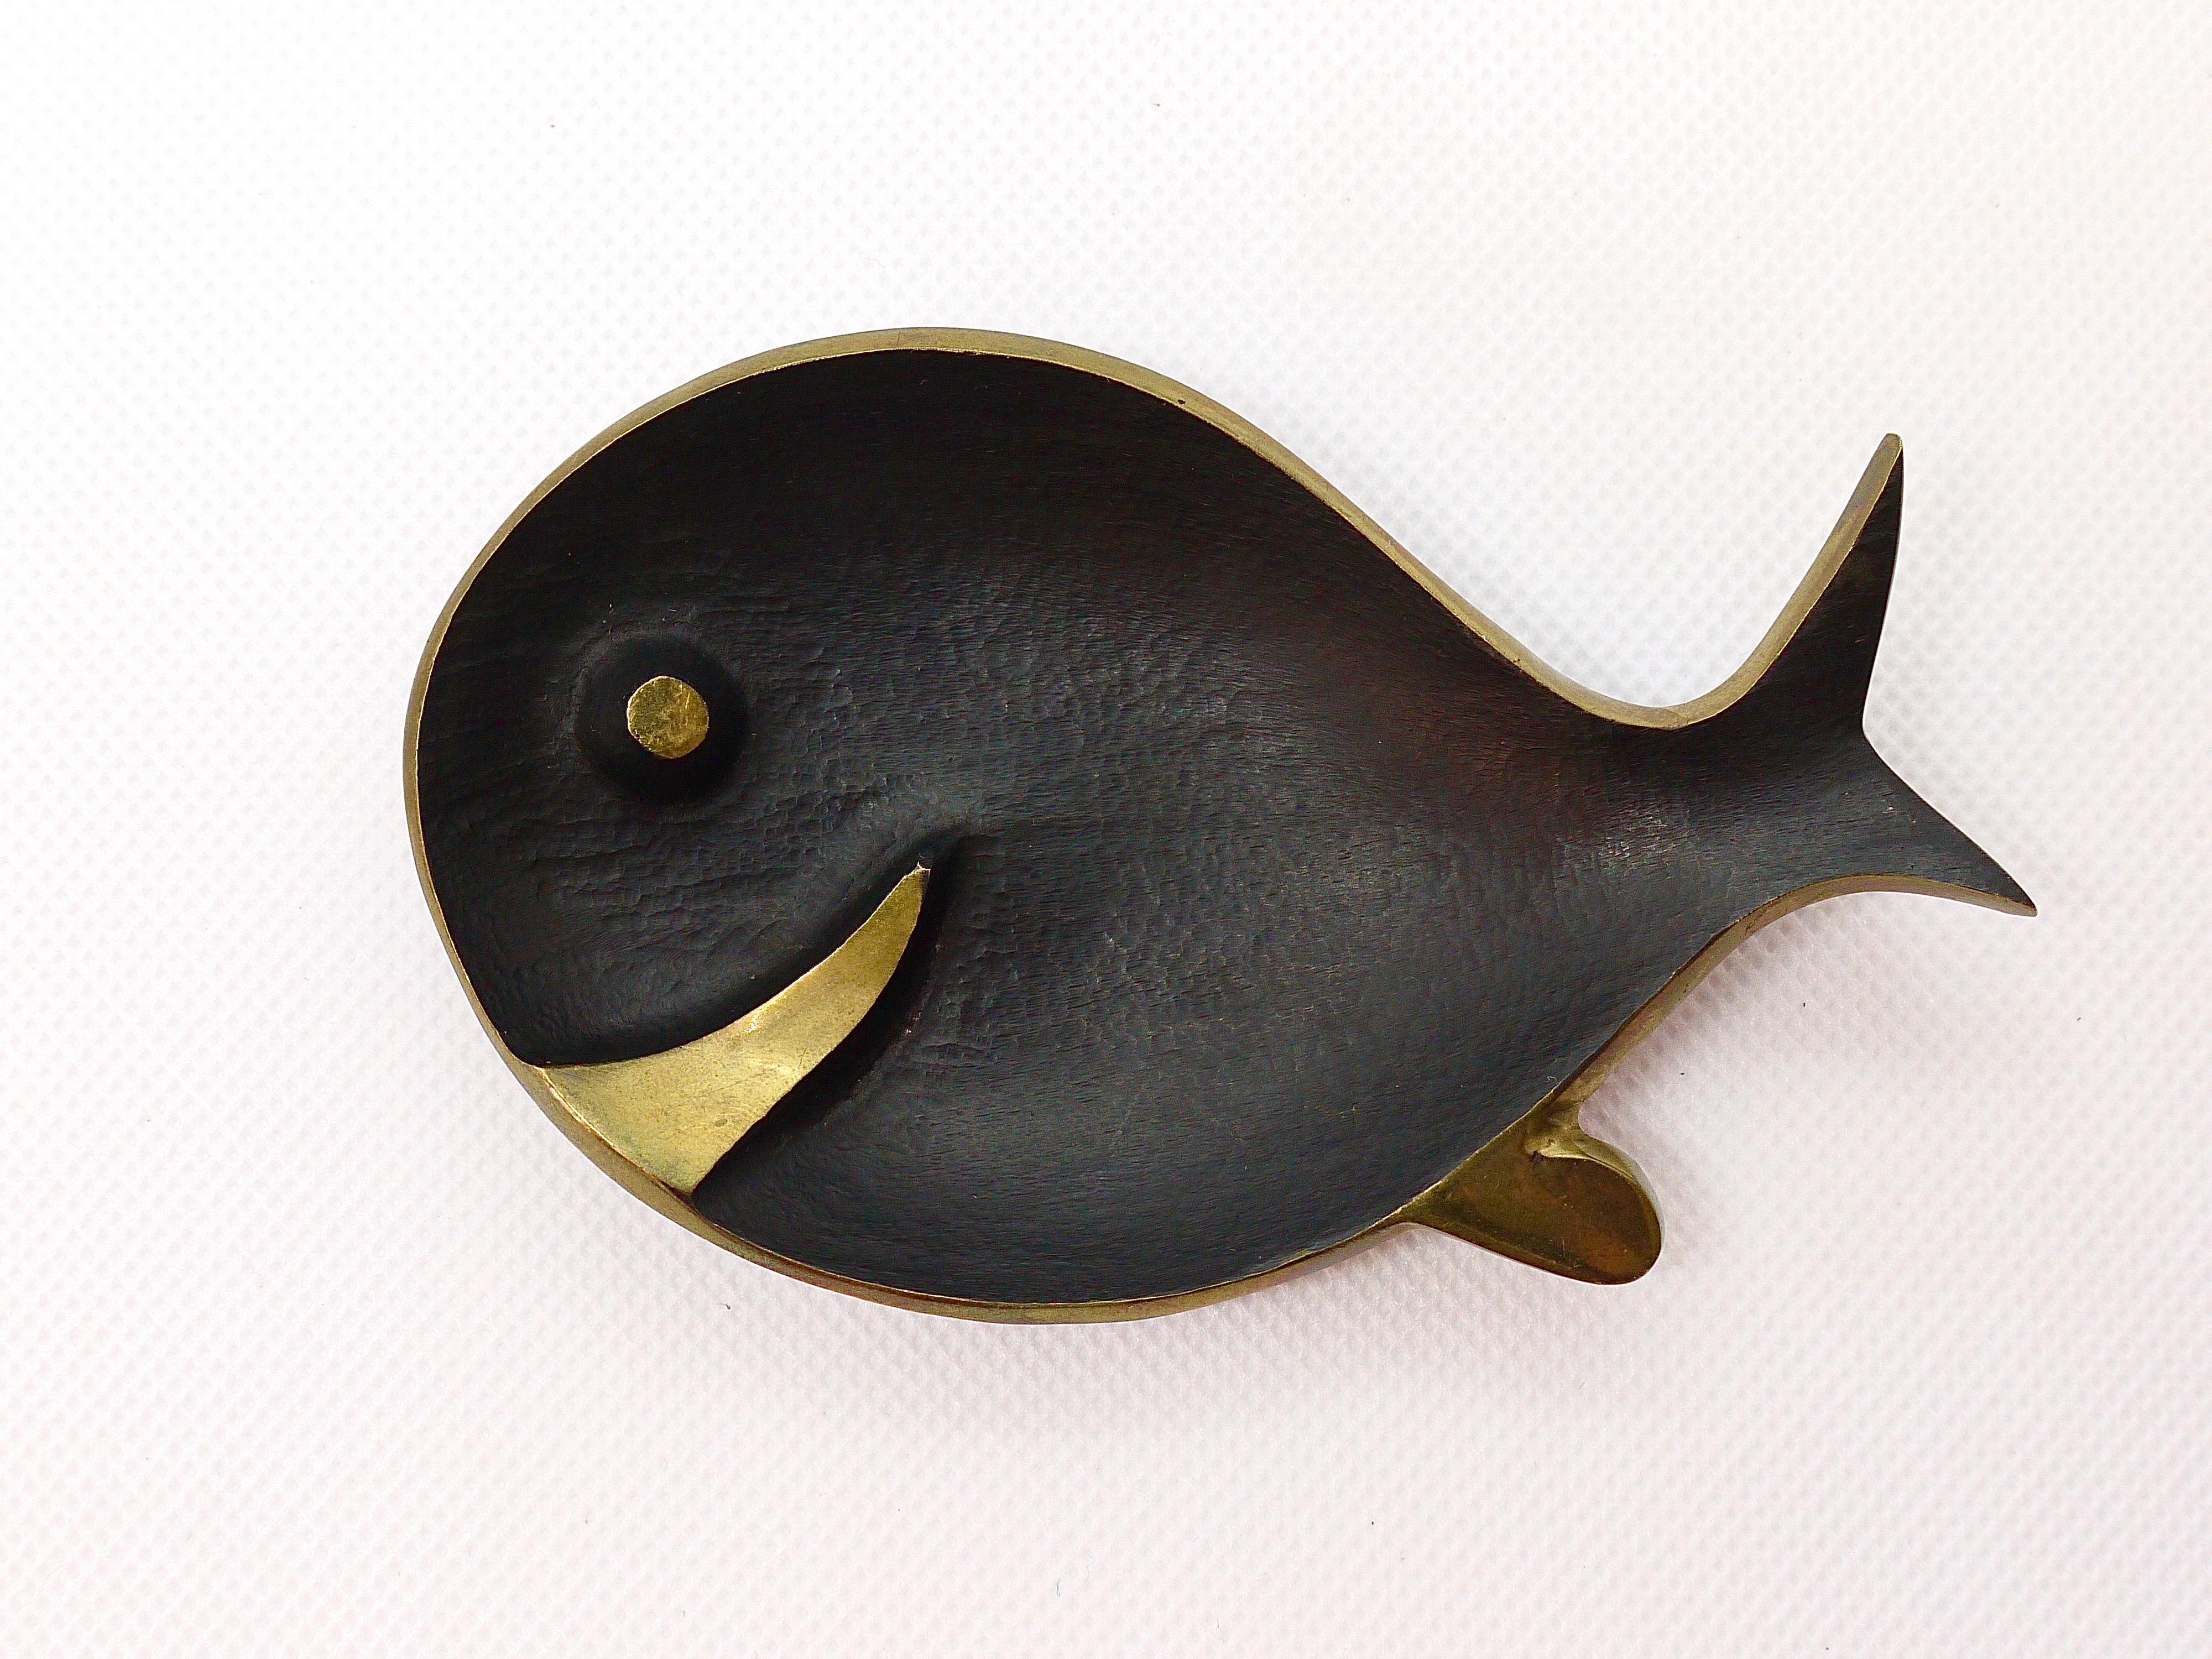 A charming modernist bowl or ashtray in the shape of a fish. A very humorous design by Walter Bosse, executed by Hertha Baller Austria in the 1950s. Made of brass, in excellent condition. Marked.